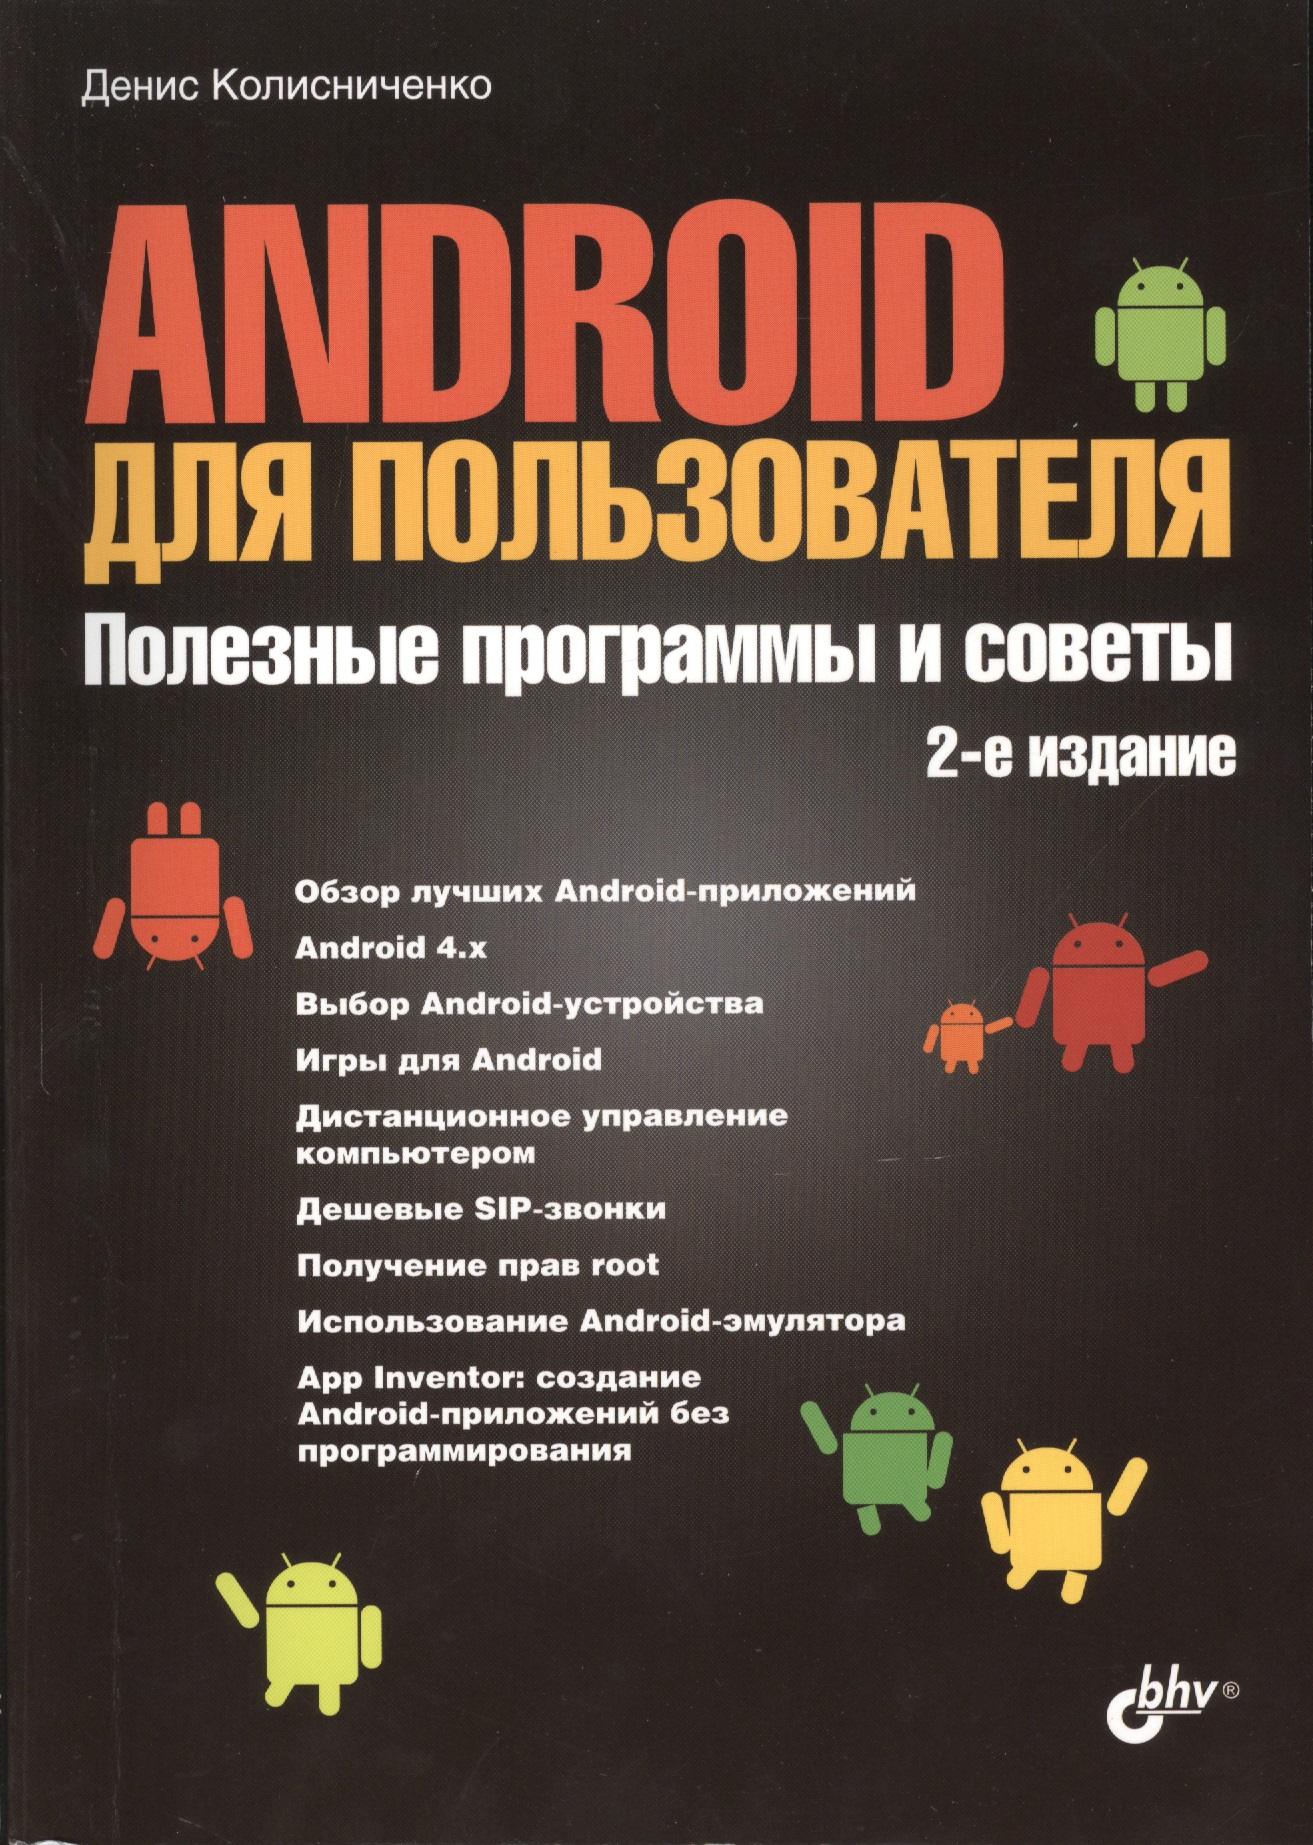 Android  .    . - 2 ., .  